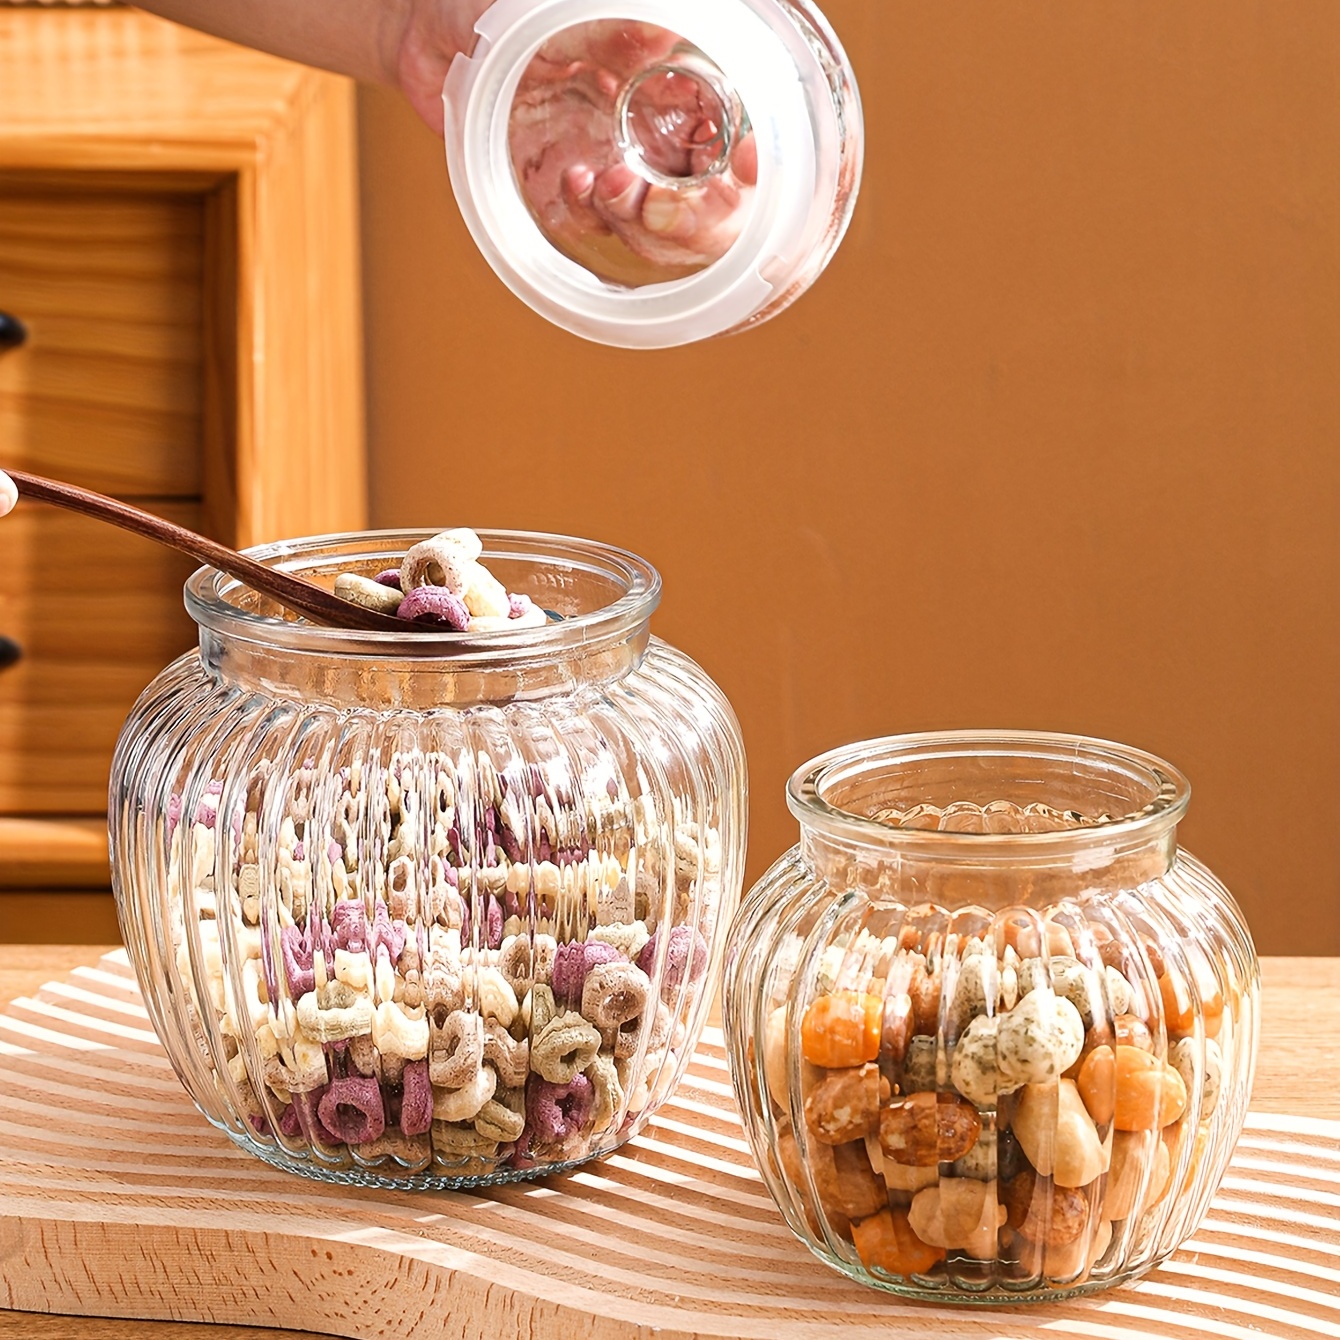 Premium Quality Glass Biscuit Jar with Air-tight lid for Preserving Dry  Food, Cookies, Candies, Snacks